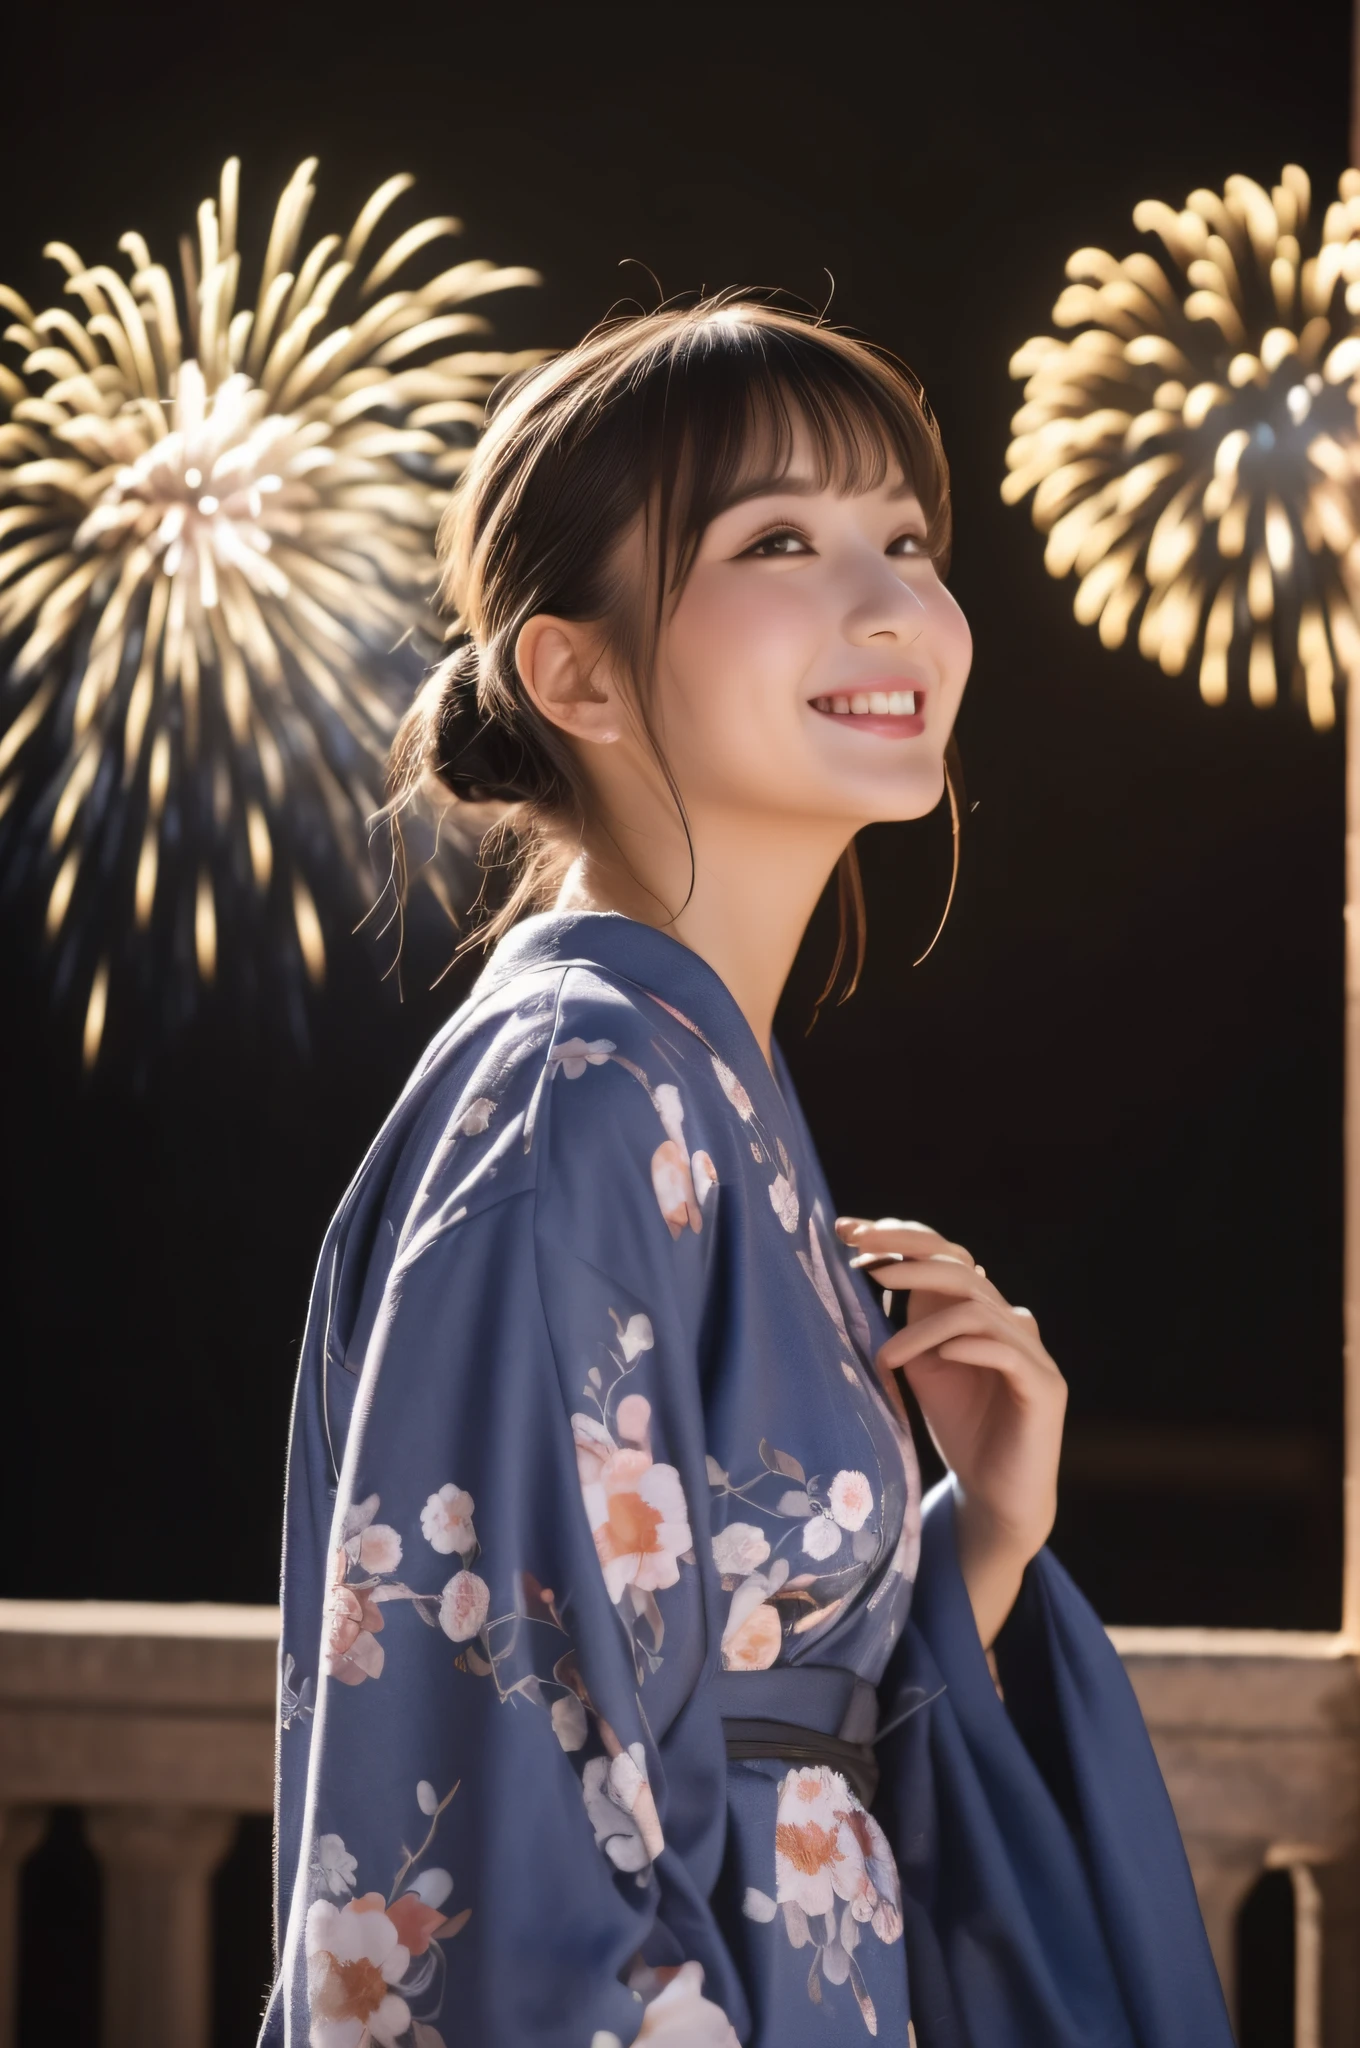 ((beste-Qualit))、((The ultra -The high-definition))、finely detail、(((Beautiful One Girl)))、extremely detailed eye and face、skyrocket、Yukata with a light floral pattern、Looking up at the fireworks、Shine in the eyes、Upbeat cheeks、A slight smile、poneyTail